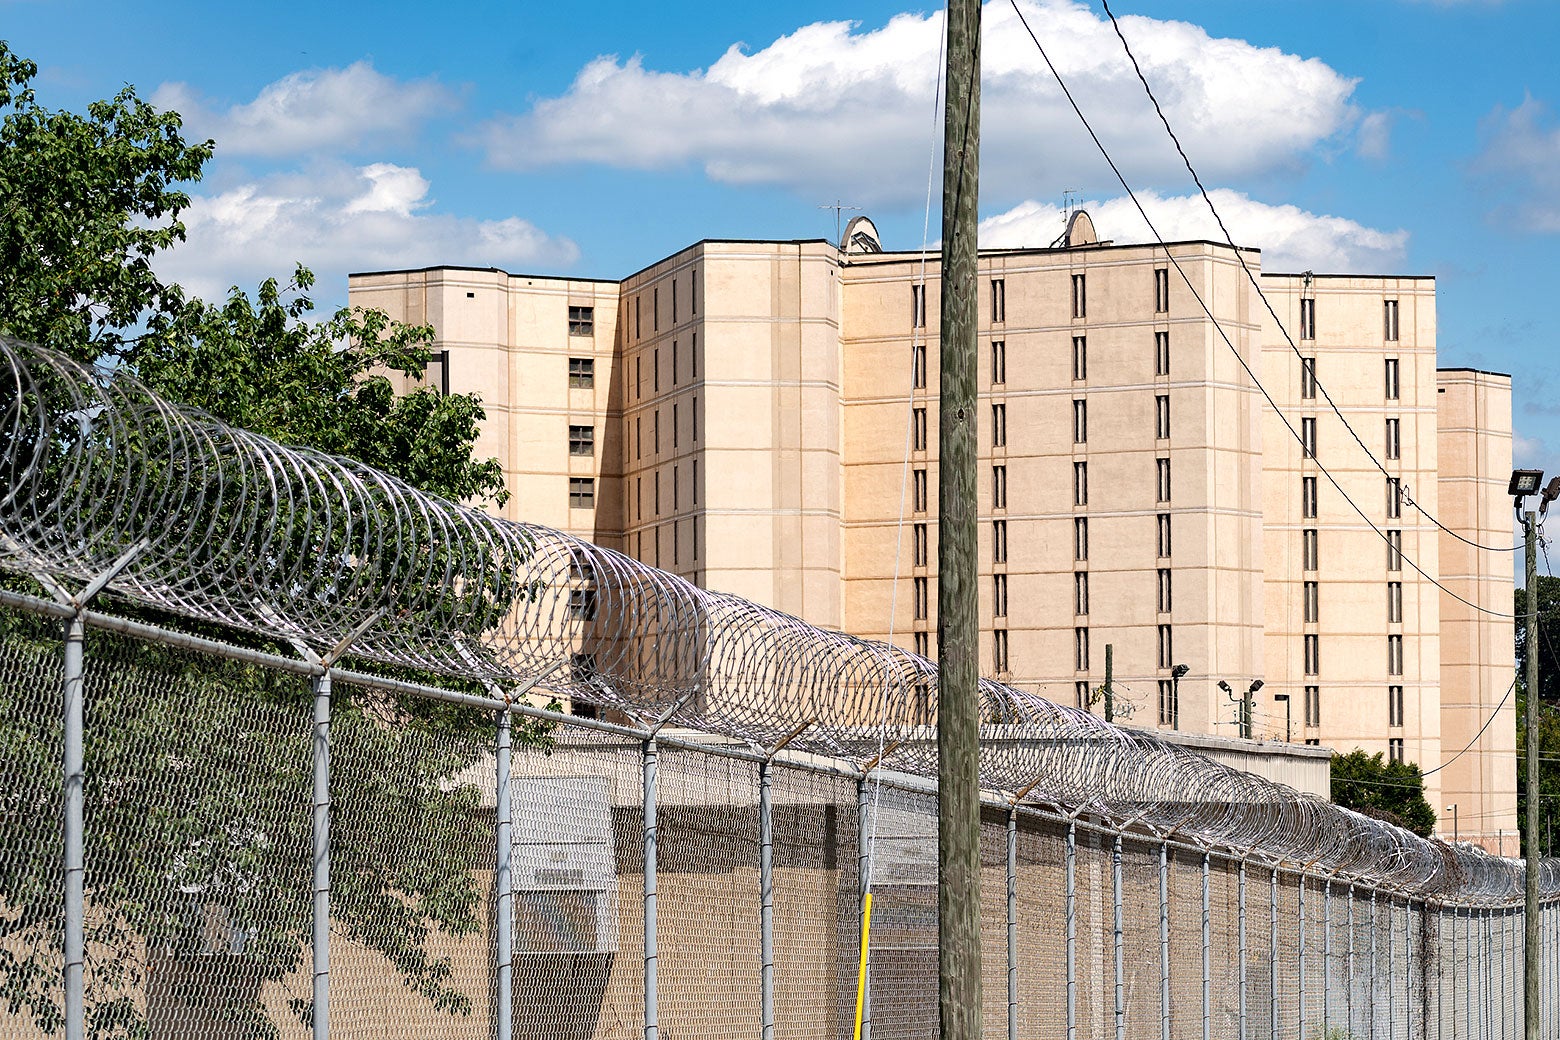 Trump Won’t Experience the Full Horror of the Fulton County Jail. No One Should. George Chidi